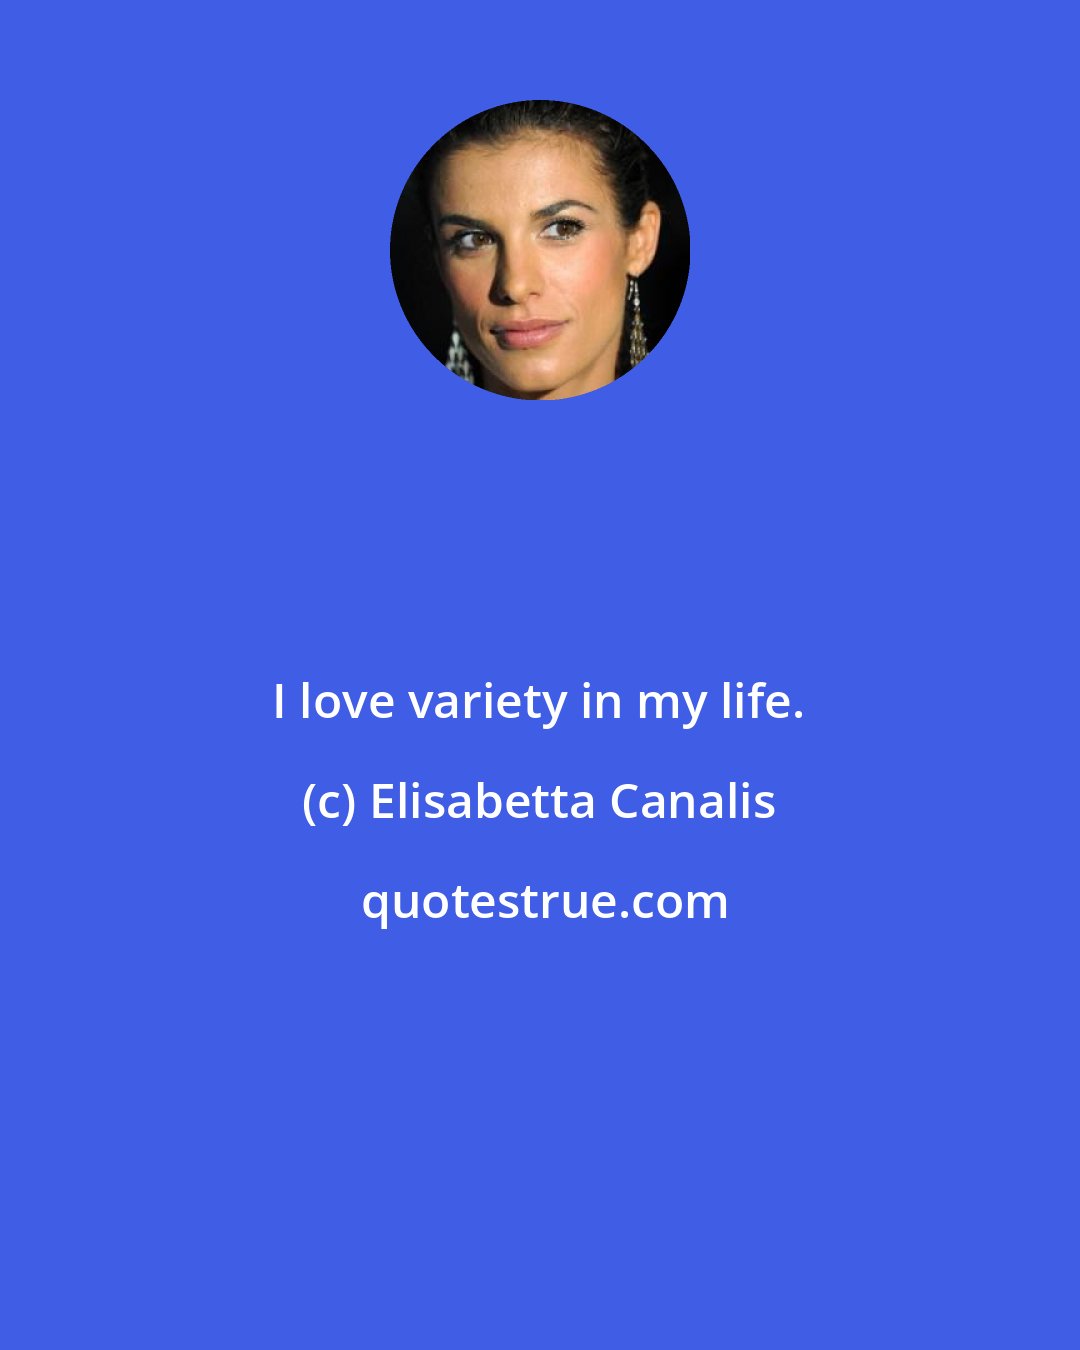 Elisabetta Canalis: I love variety in my life.